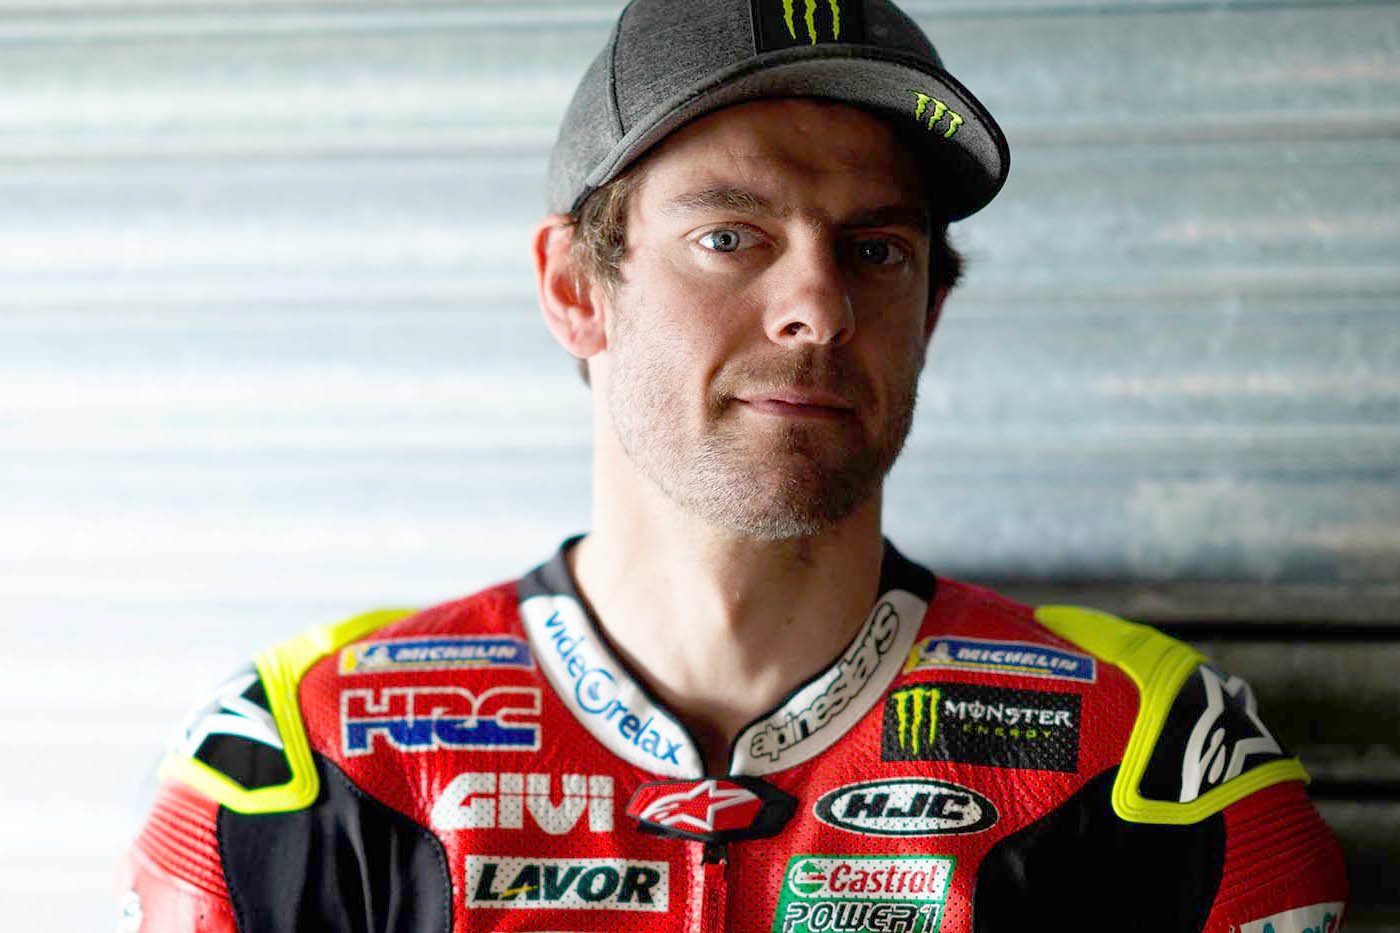 Cal Crutchlow may fill in for Morbidelli who is more likely to miss more races after injury